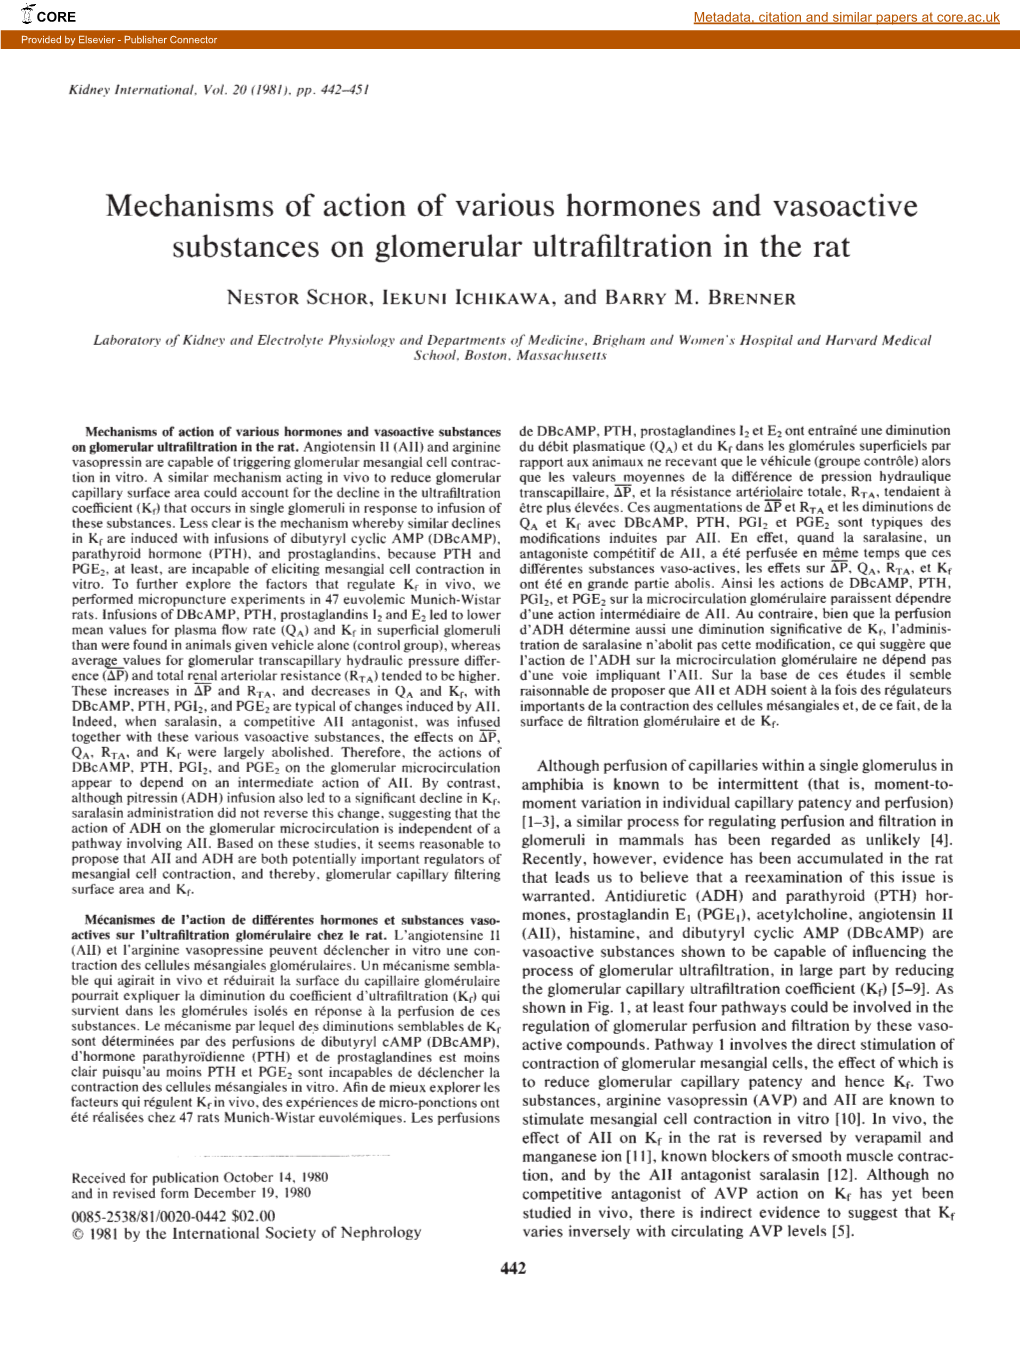 Mechanisms of Action of Various Hormones and Vasoactive Substances on Glomerular Ultrafiltration in the Rat